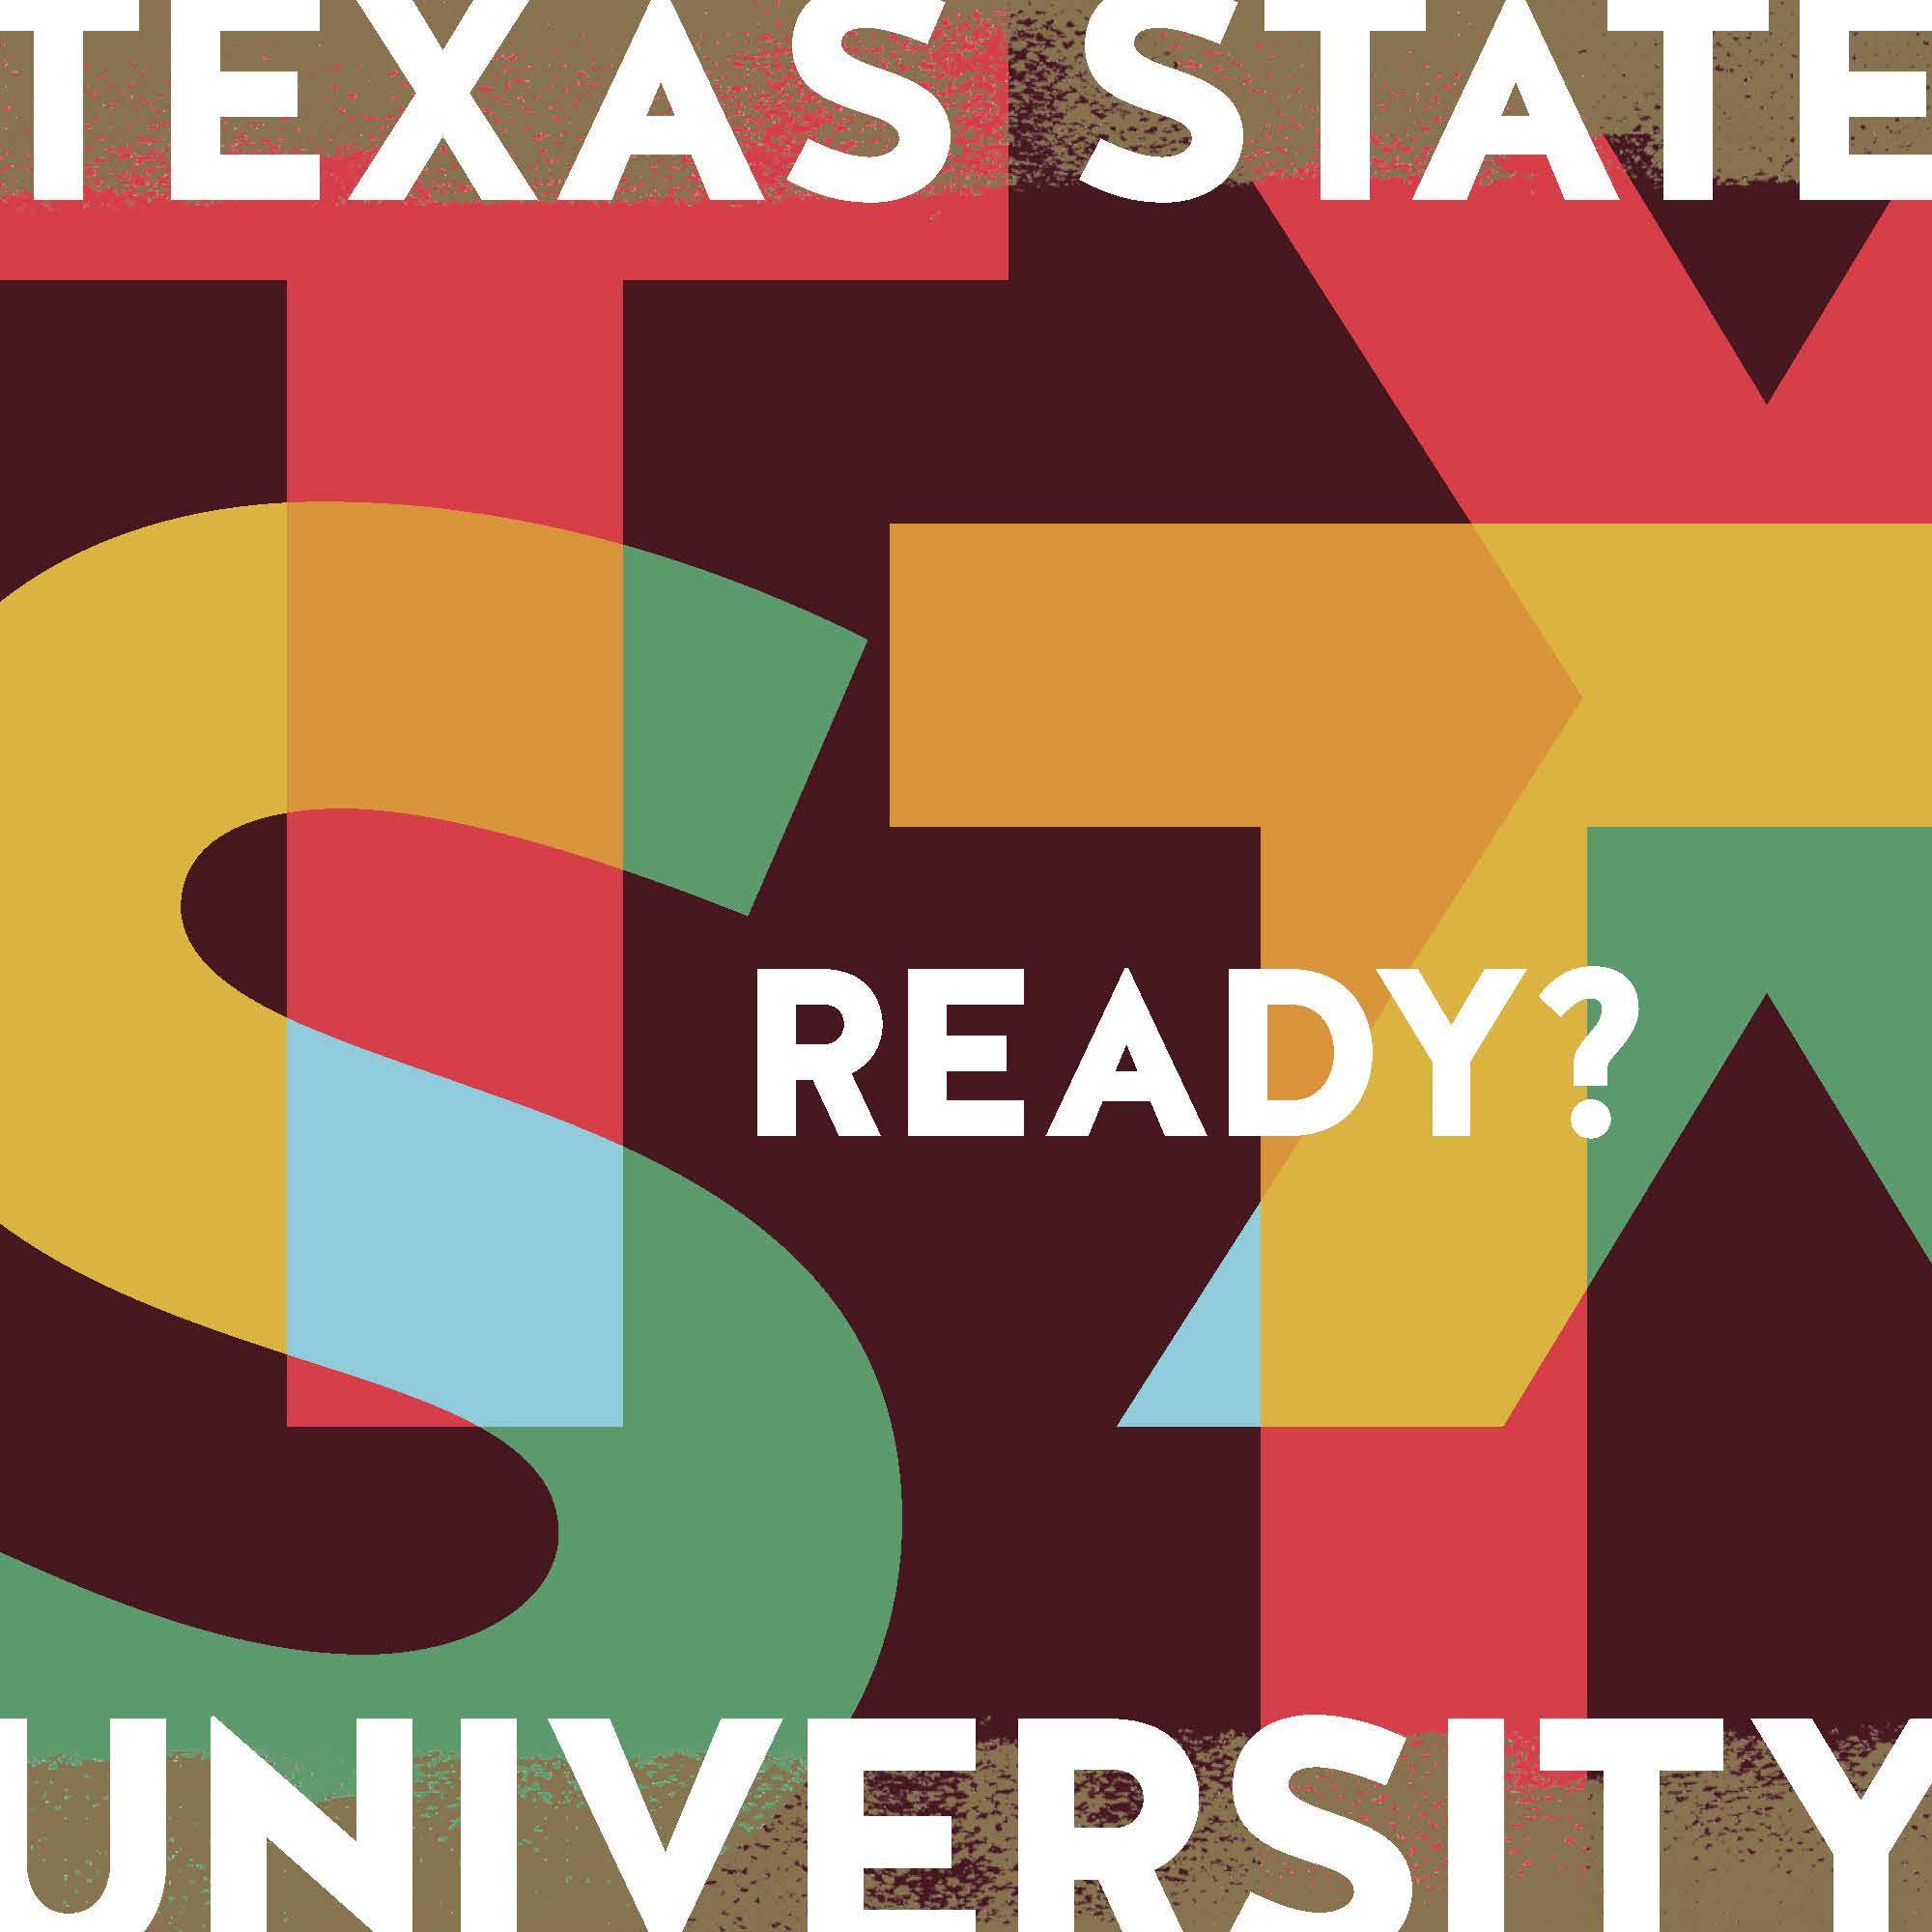 This is a thumbnail for the 2021-2022 Texas State Viewbook. Click on the thumbnail to access the full file.